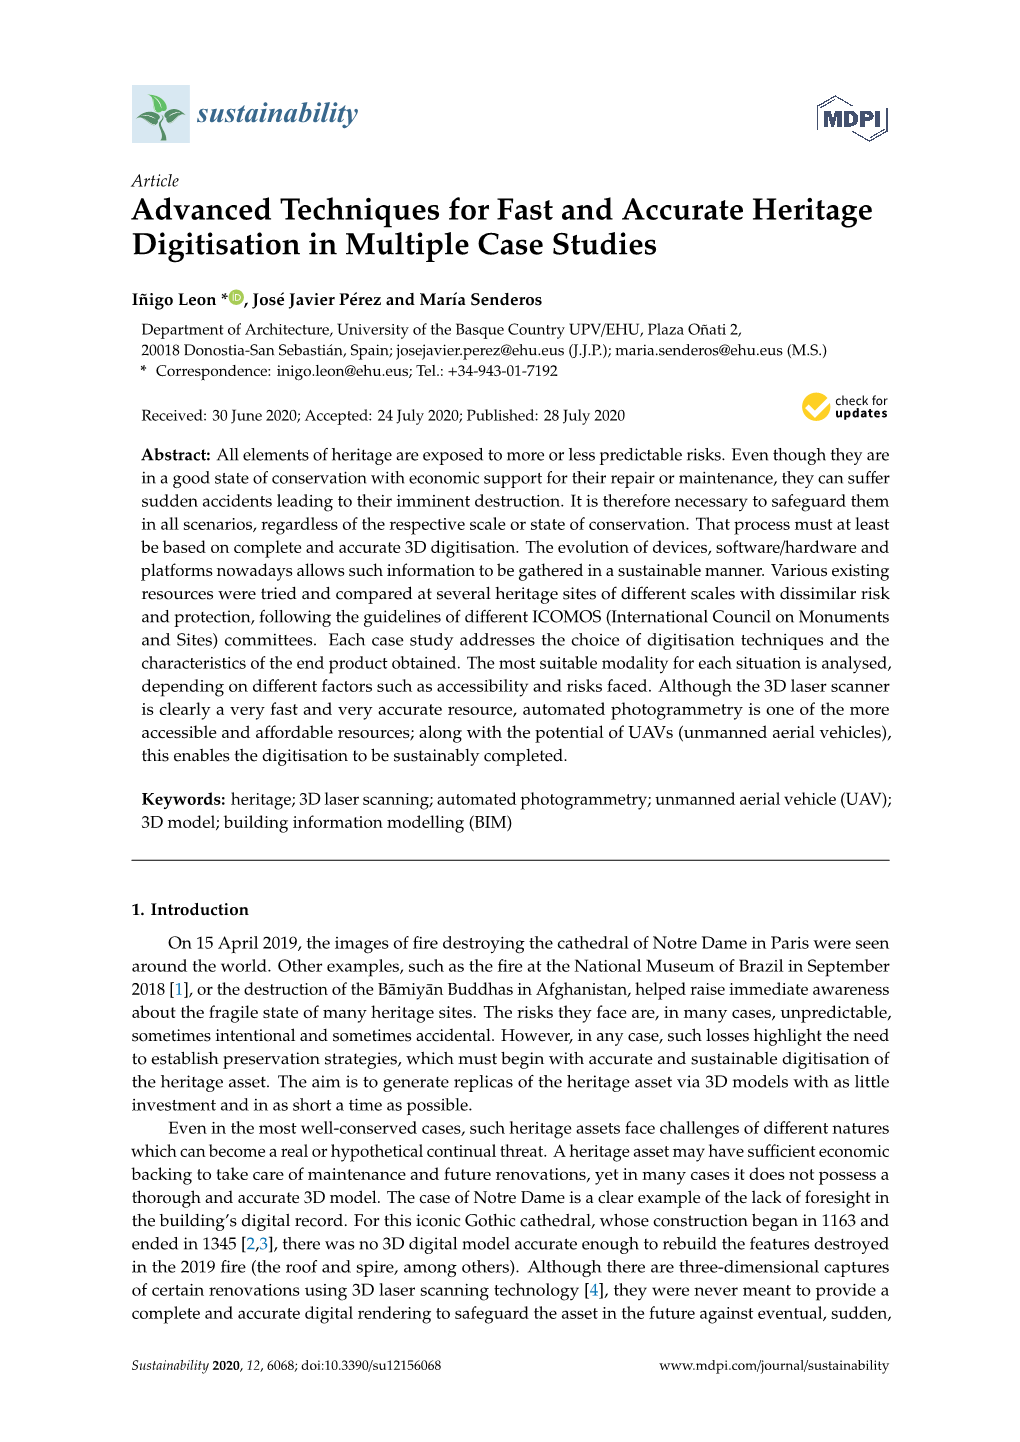 Advanced Techniques for Fast and Accurate Heritage Digitisation in Multiple Case Studies